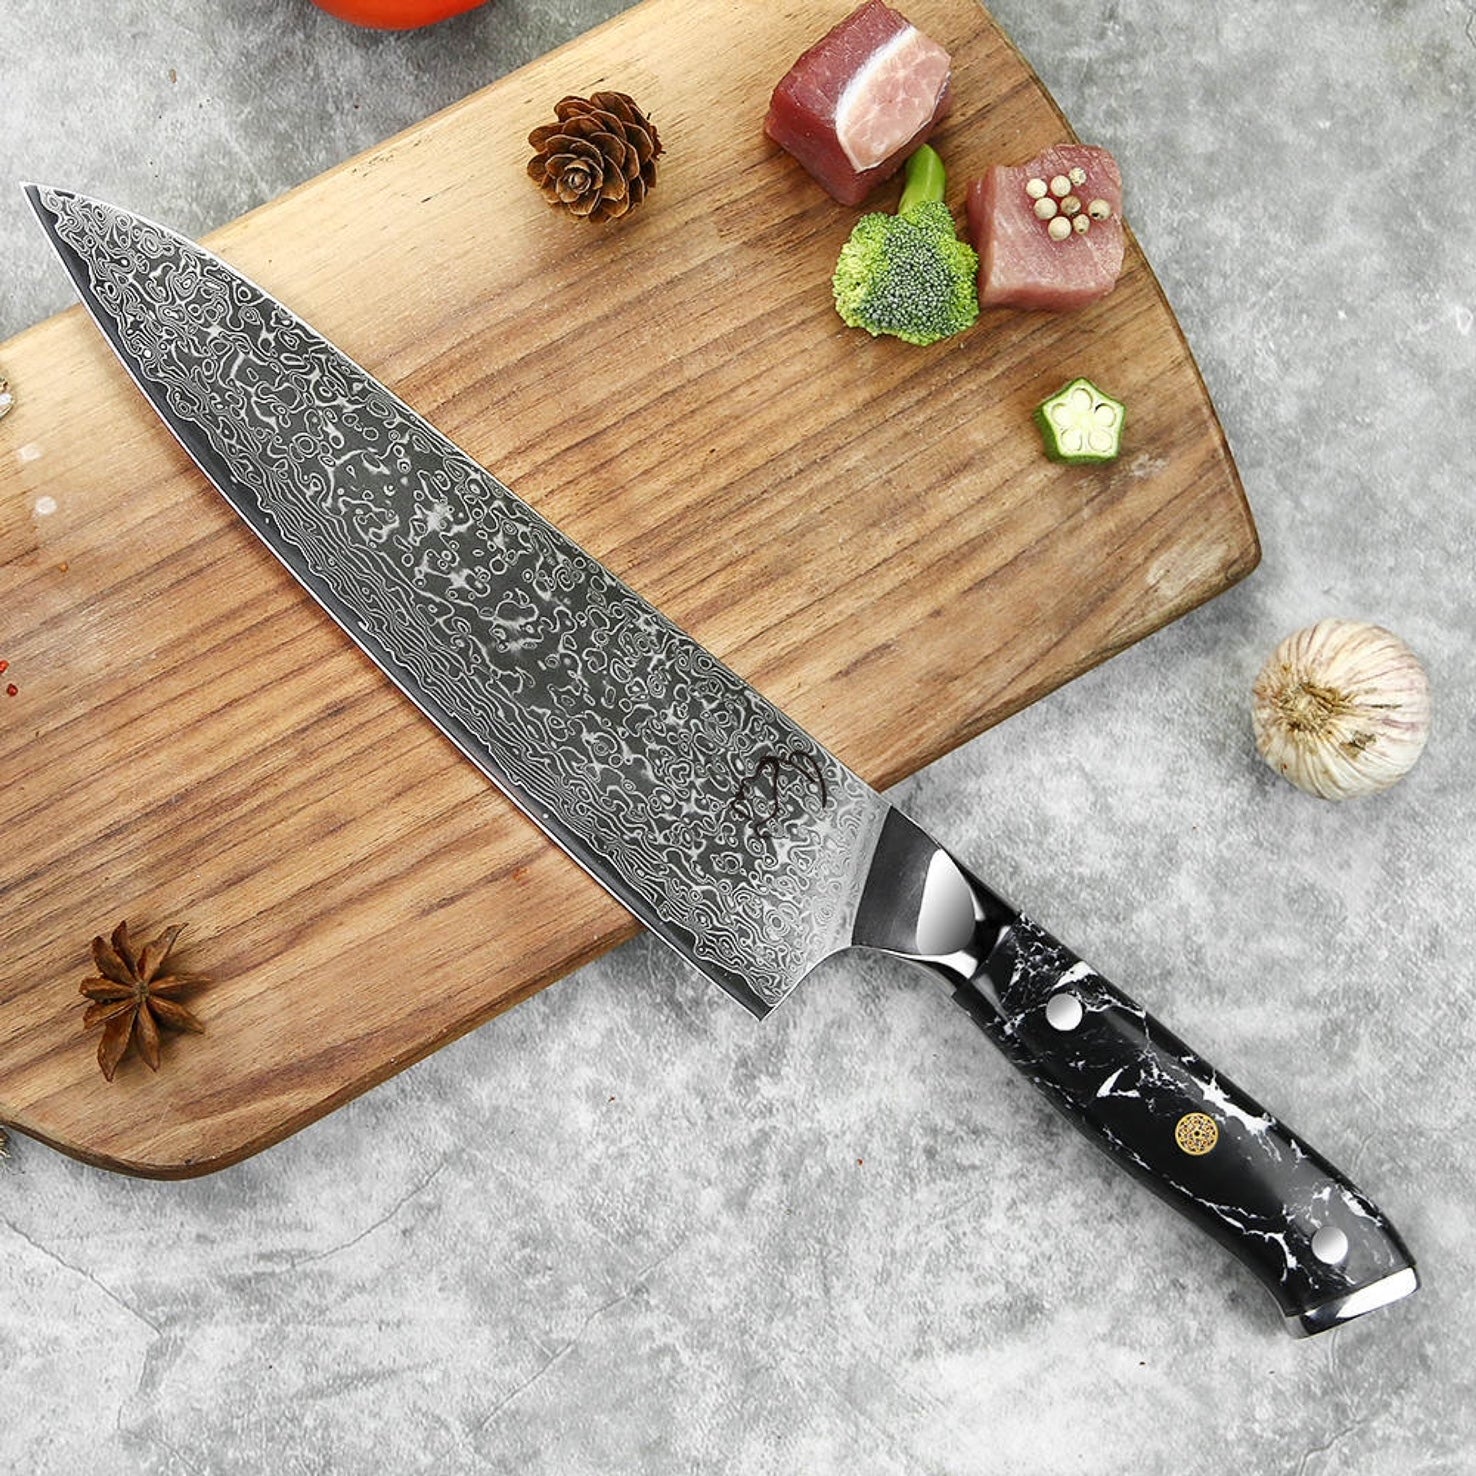 Excaliblades Chef Knife